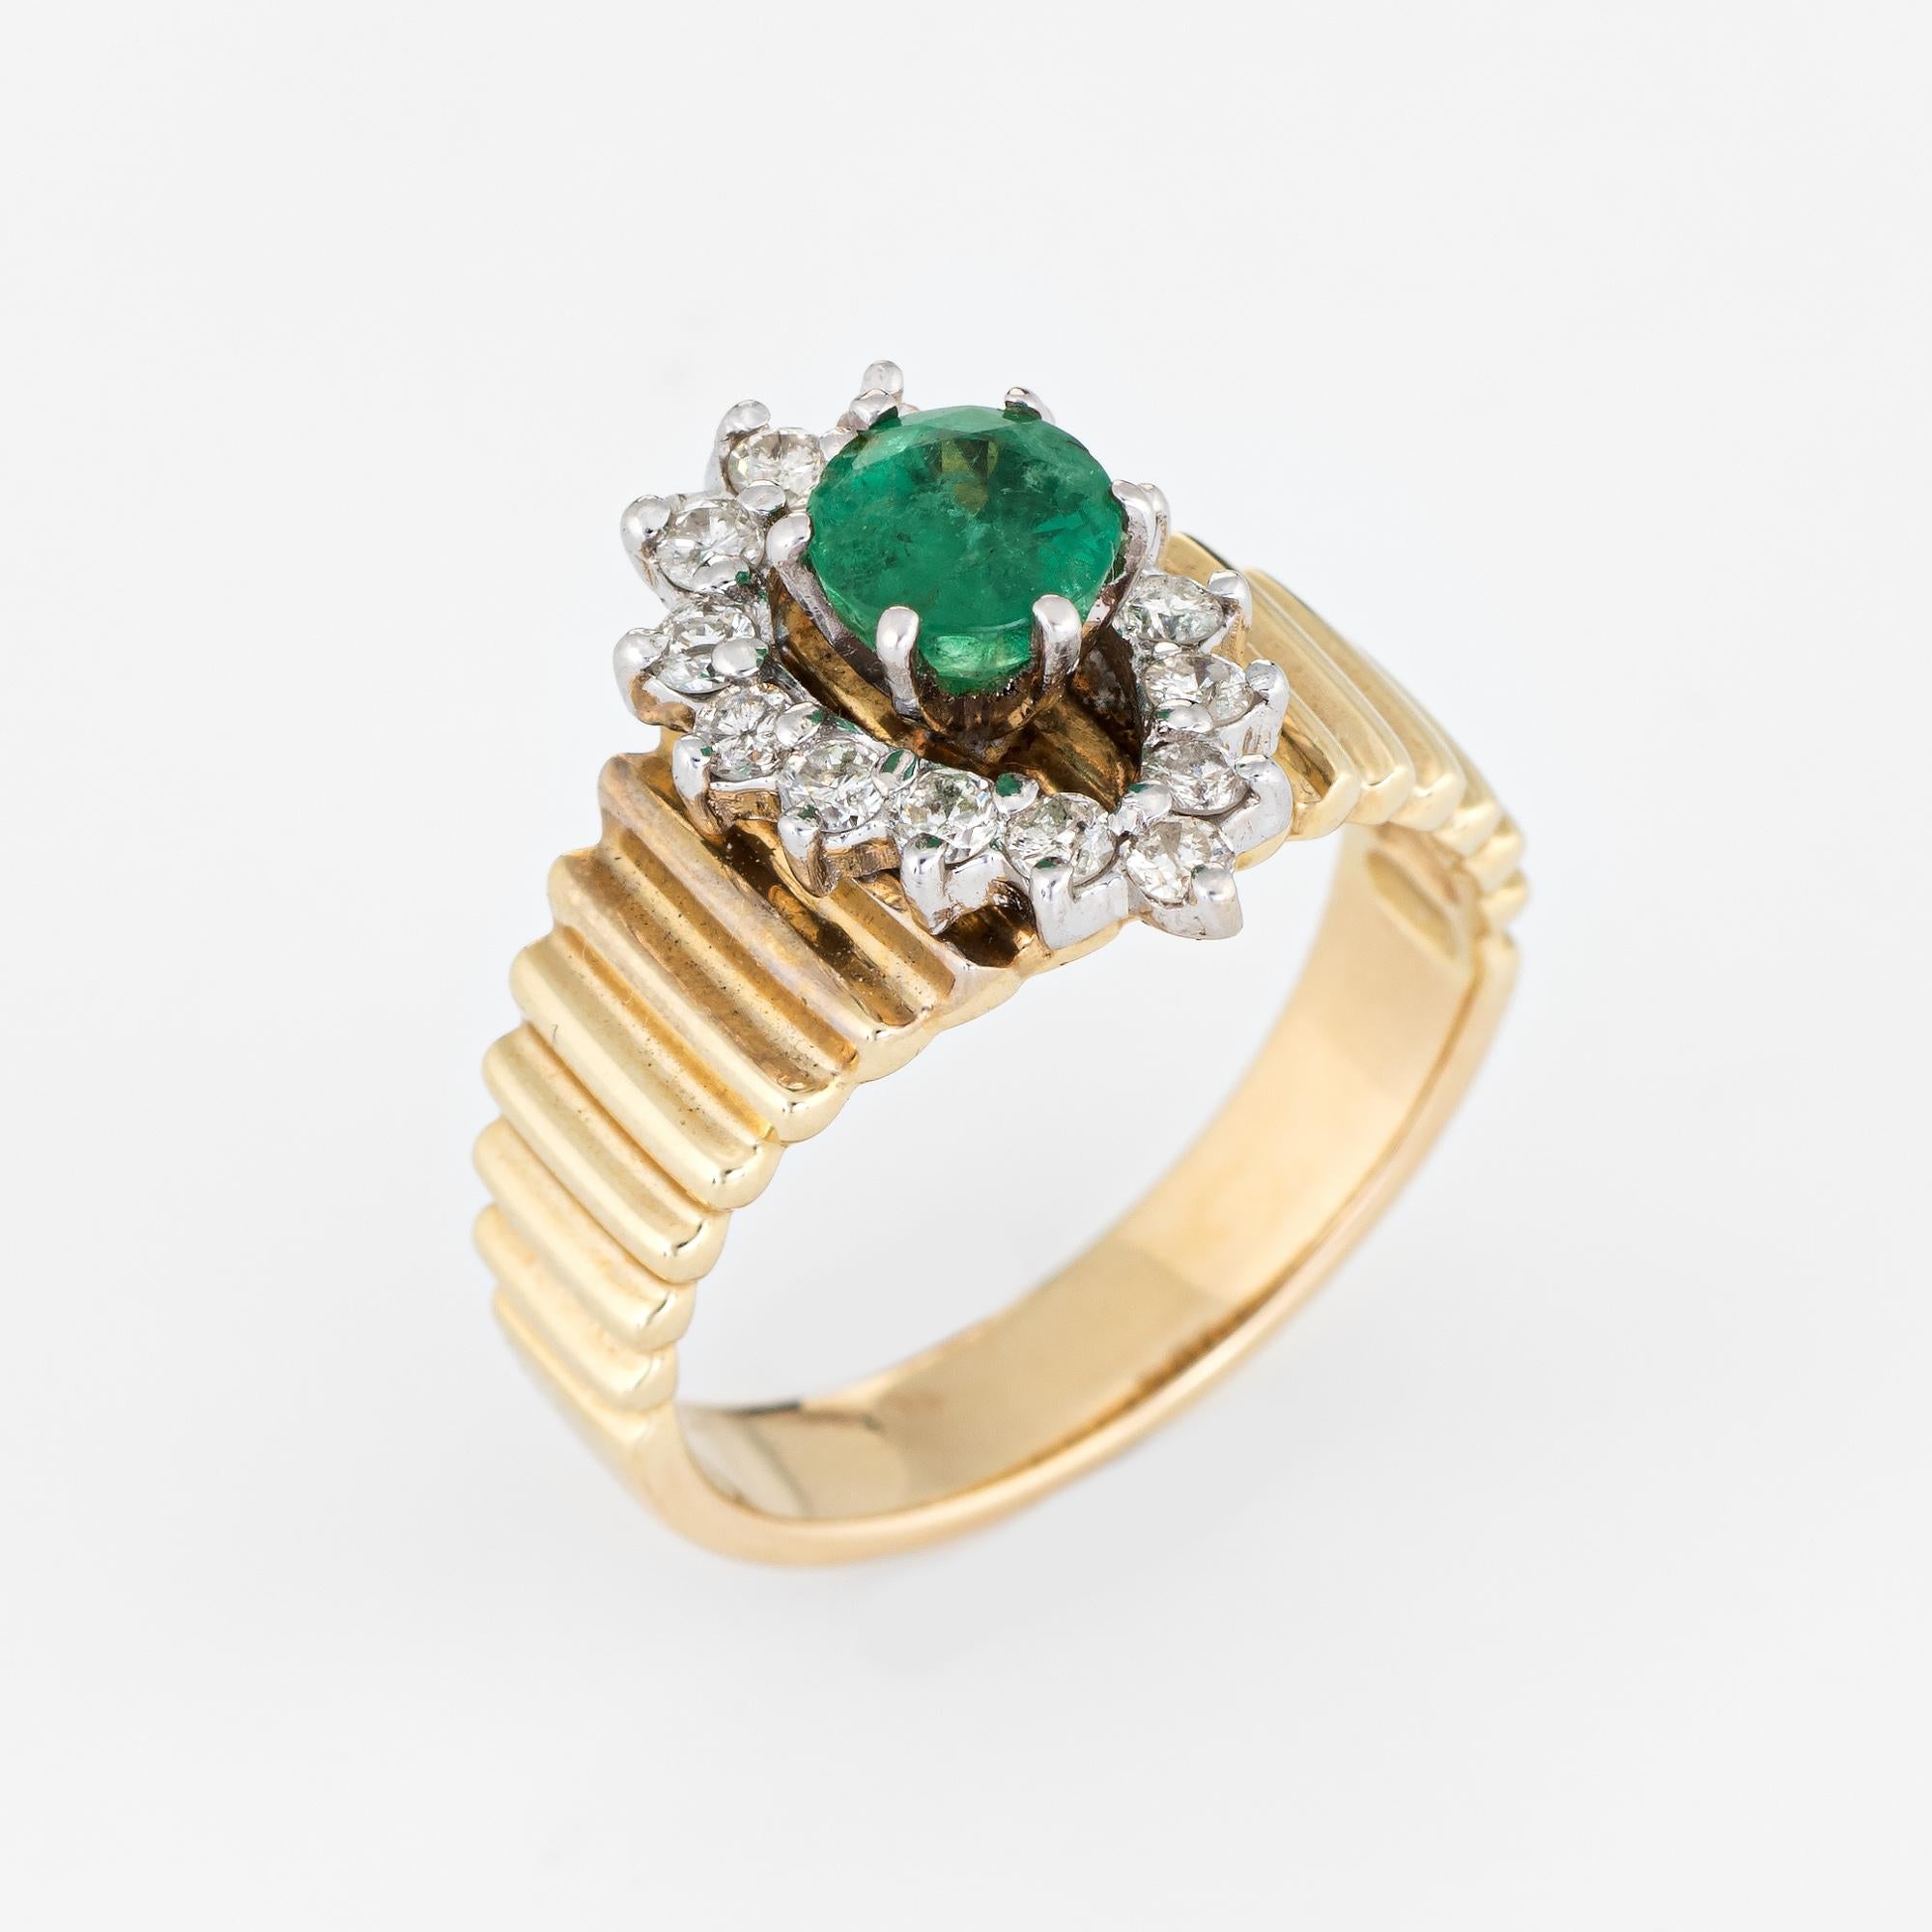 Stylish vintage emerald & diamond ring (circa 1970s) crafted in 14 karat yellow gold. 

Round faceted emerald measures 5.5mm (estimated at 0.62 carats), accented with 14 estimated 0.03 carat round brilliant cut diamonds. The total diamond weight is